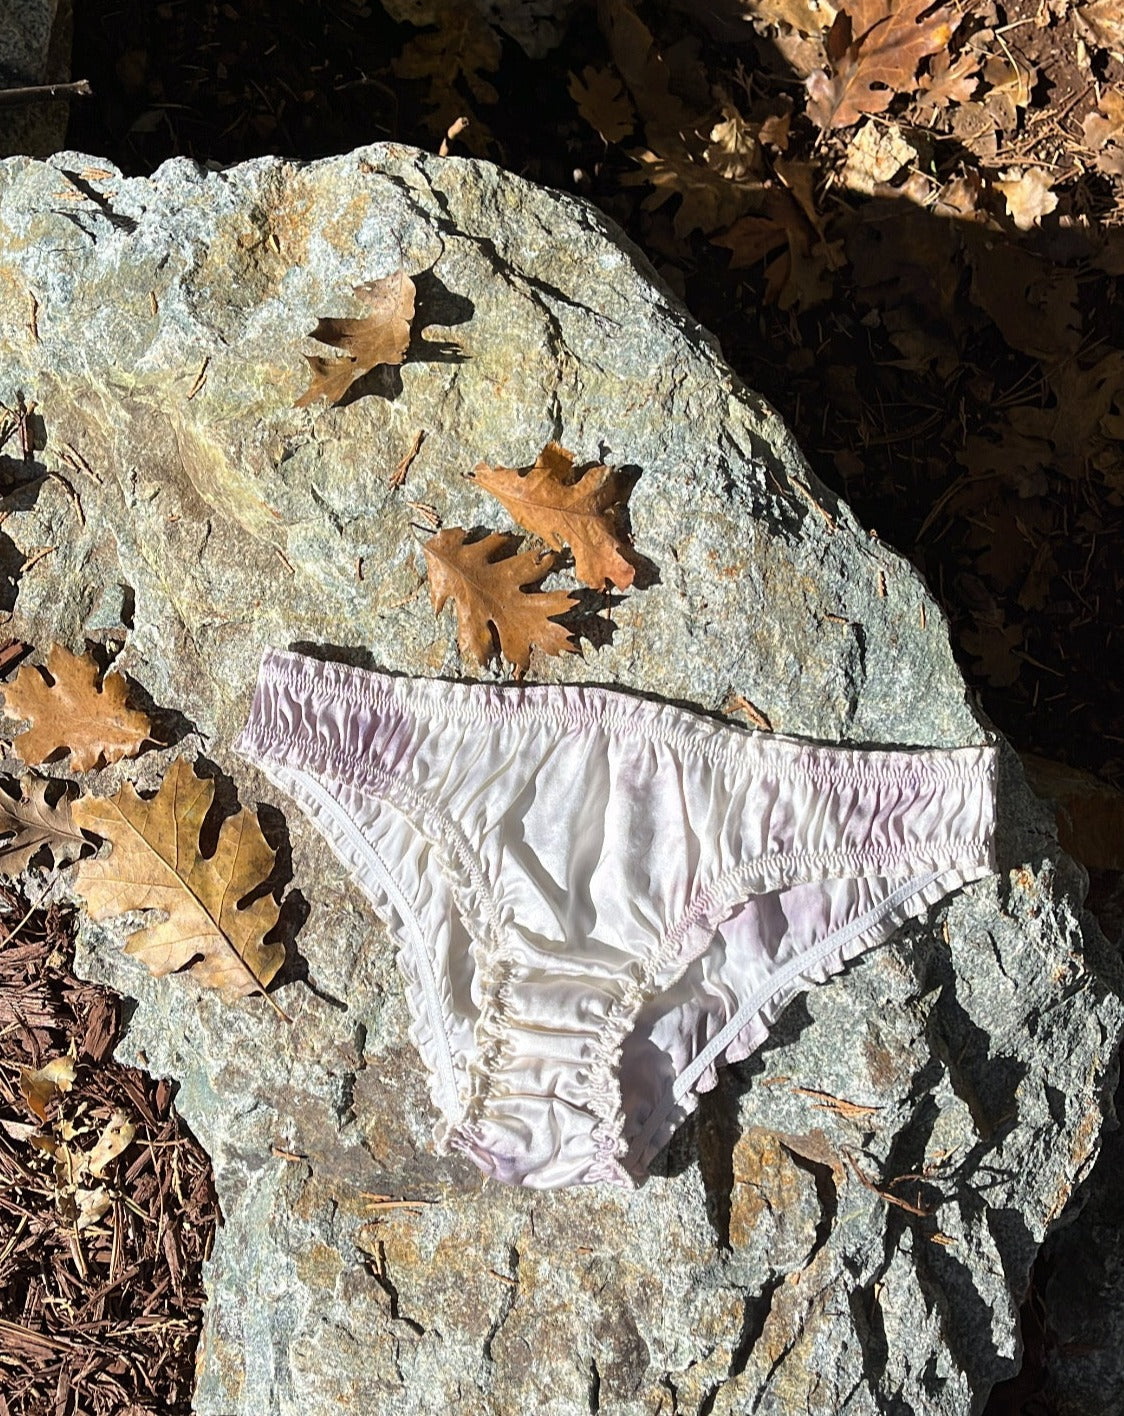 White and lavender silk plant dyed undies